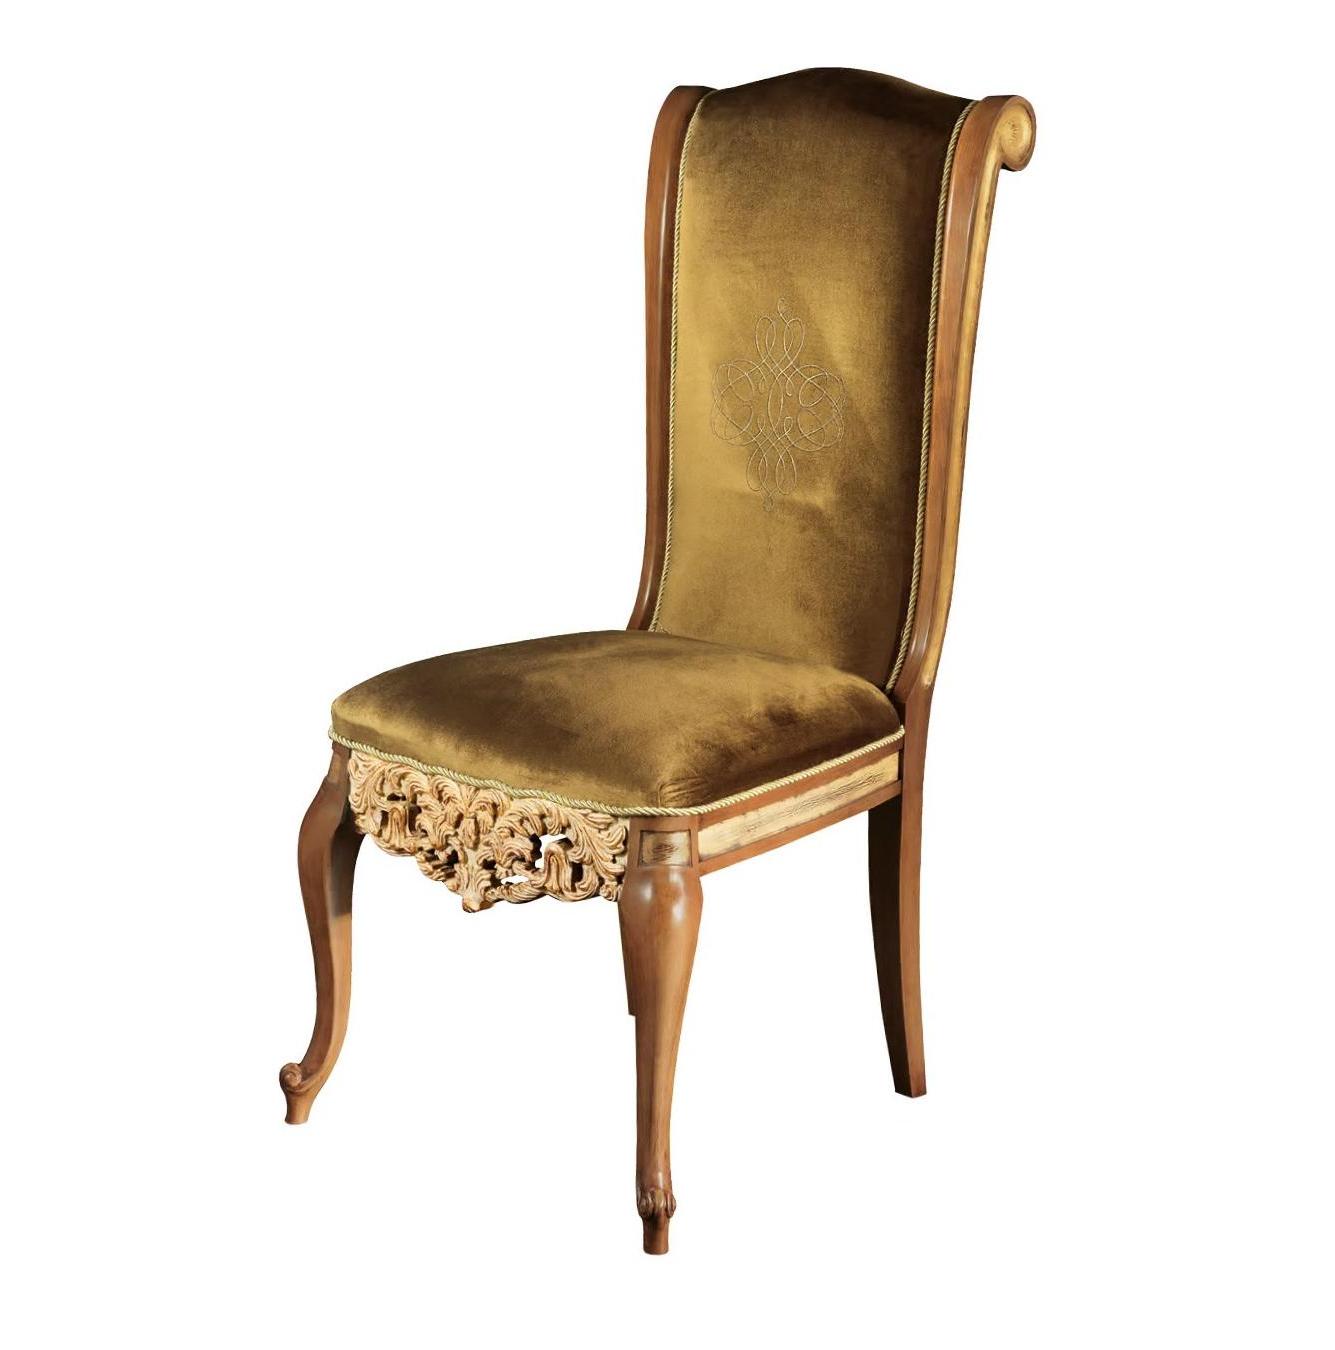 Royal Artisan Crafted Chair